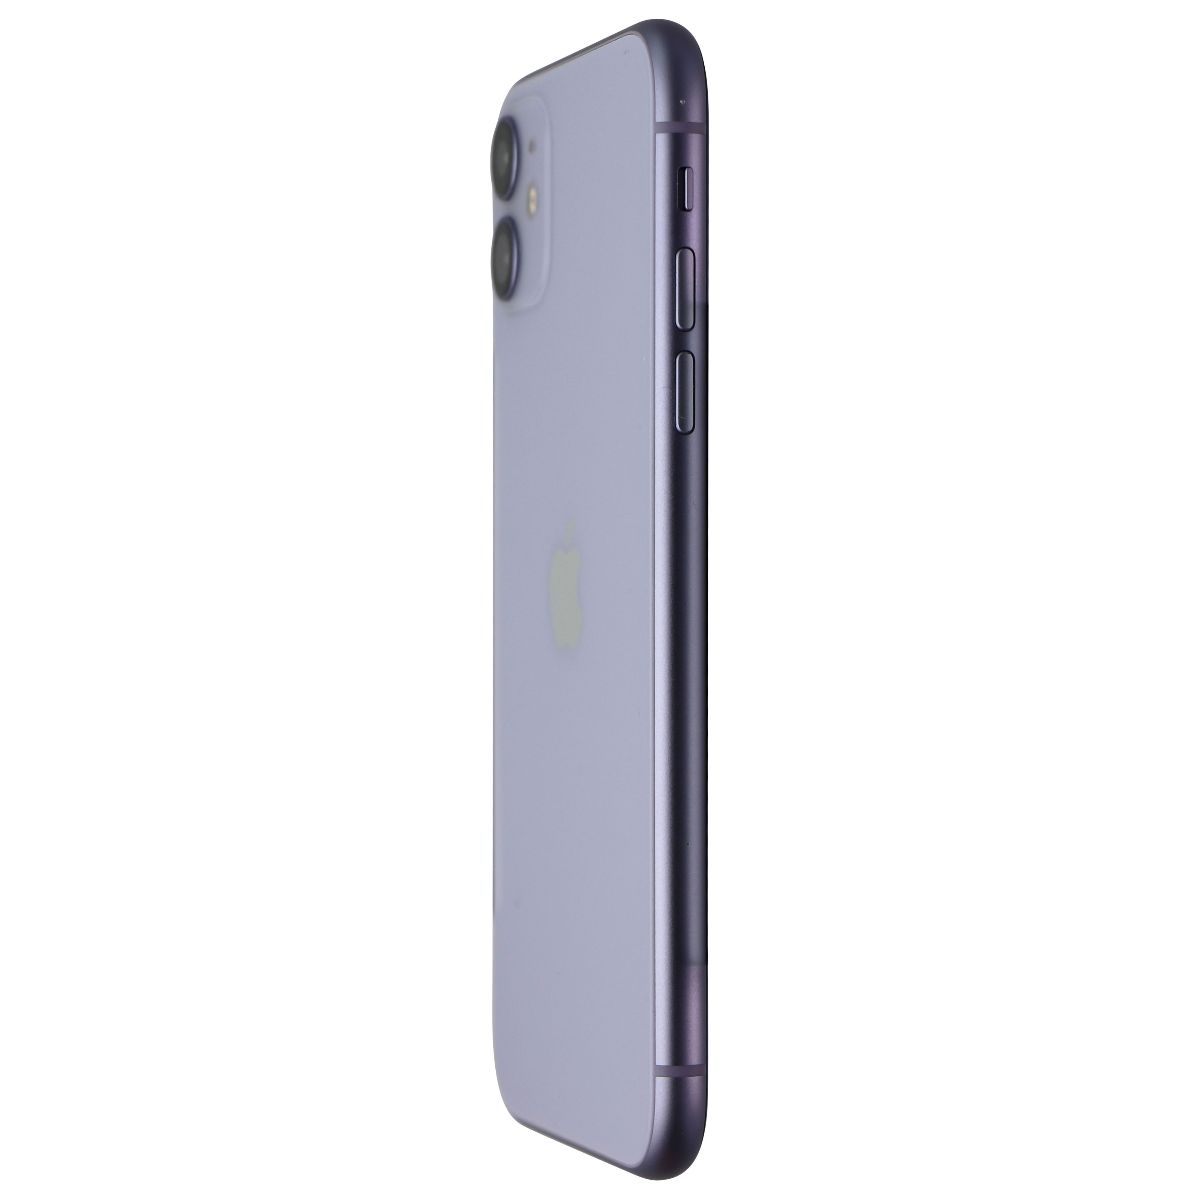 Apple iPhone 11 (6.1-in) (A2111) Unlocked - 64GB / Purple - Bad Face ID* Cell Phones & Smartphones Apple    - Simple Cell Bulk Wholesale Pricing - USA Seller